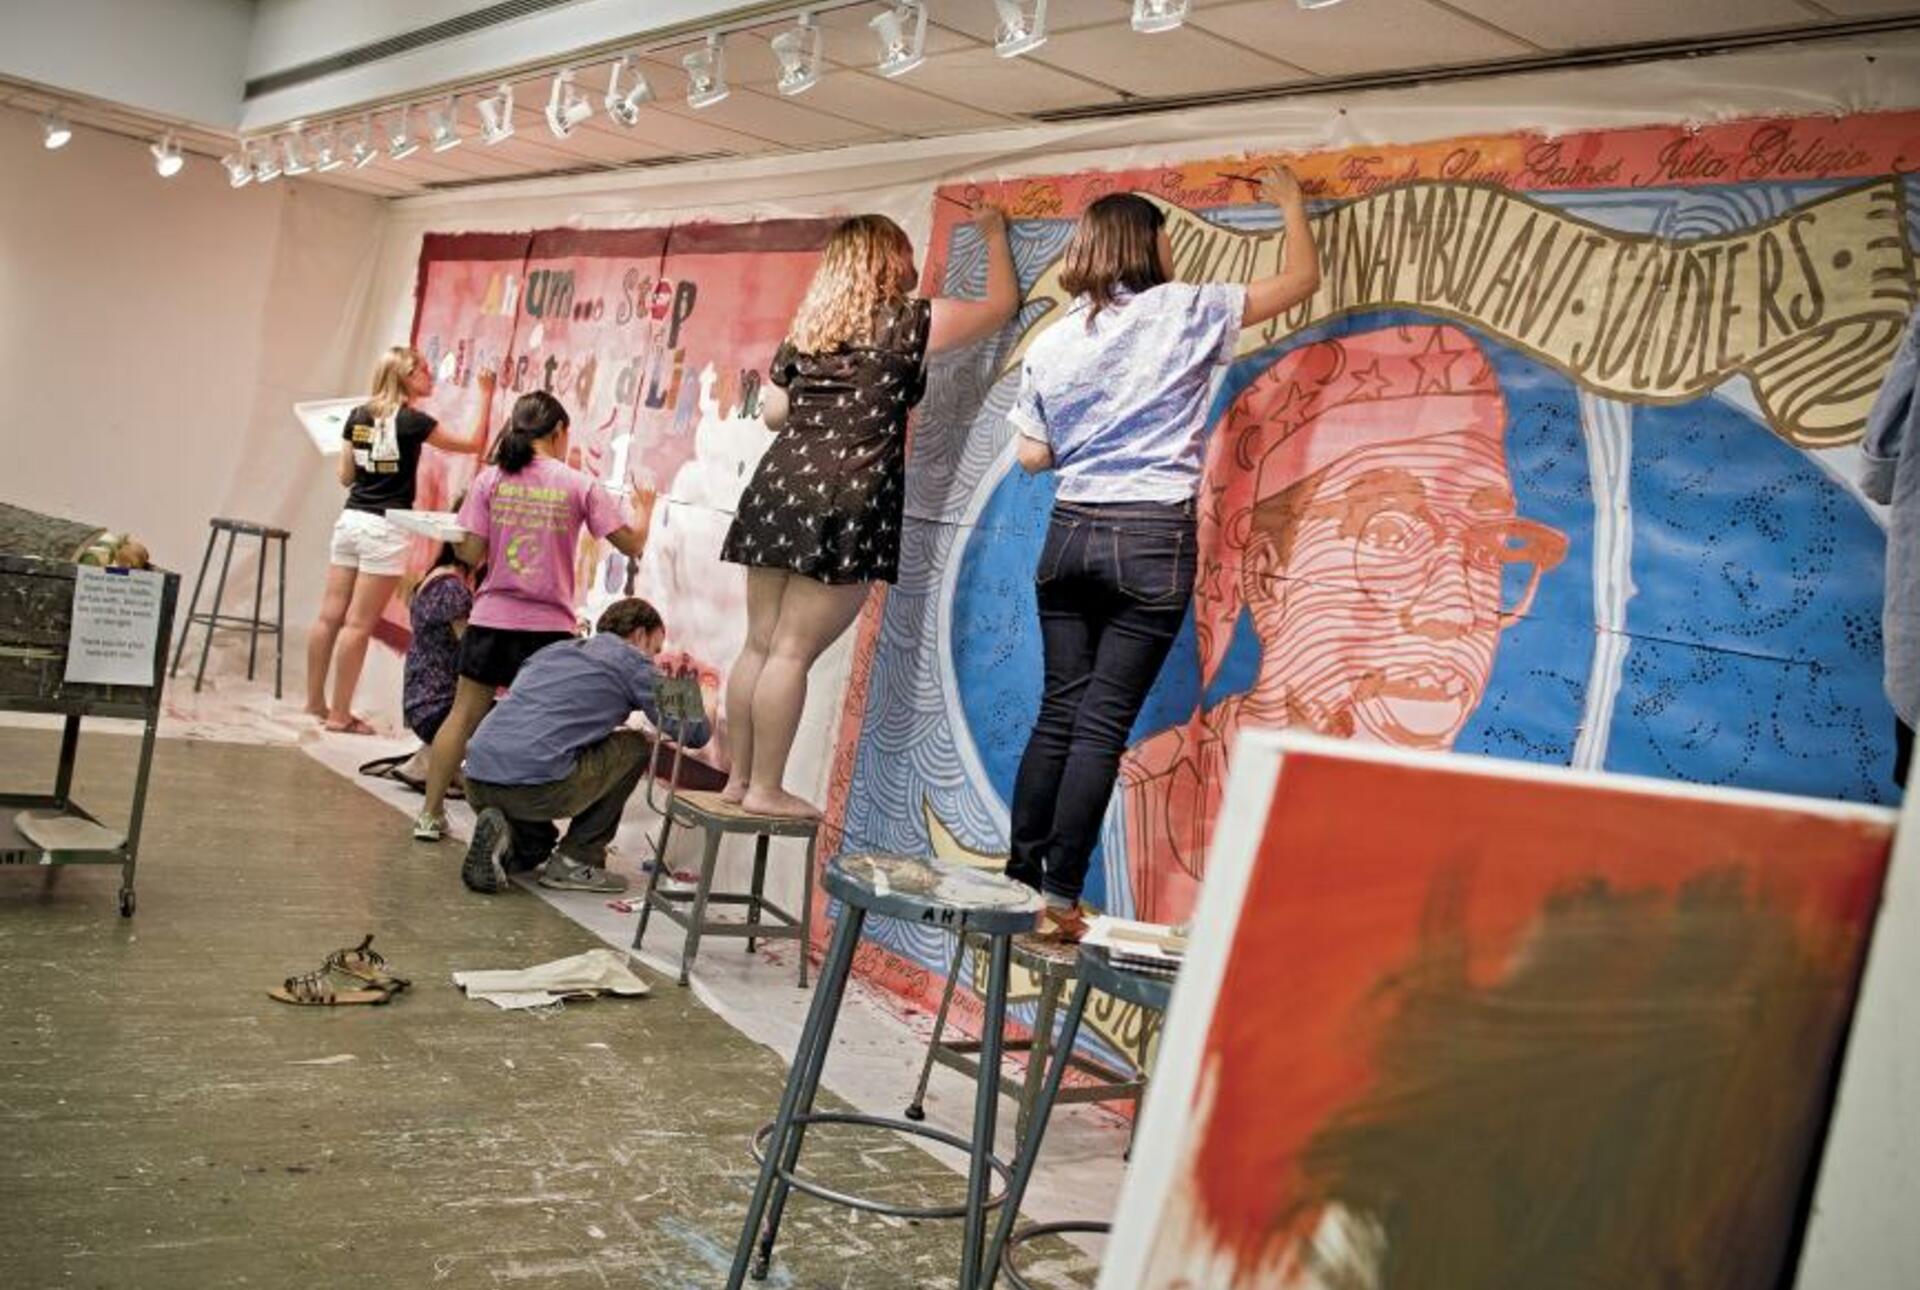 Students paint a mural on an interior wall